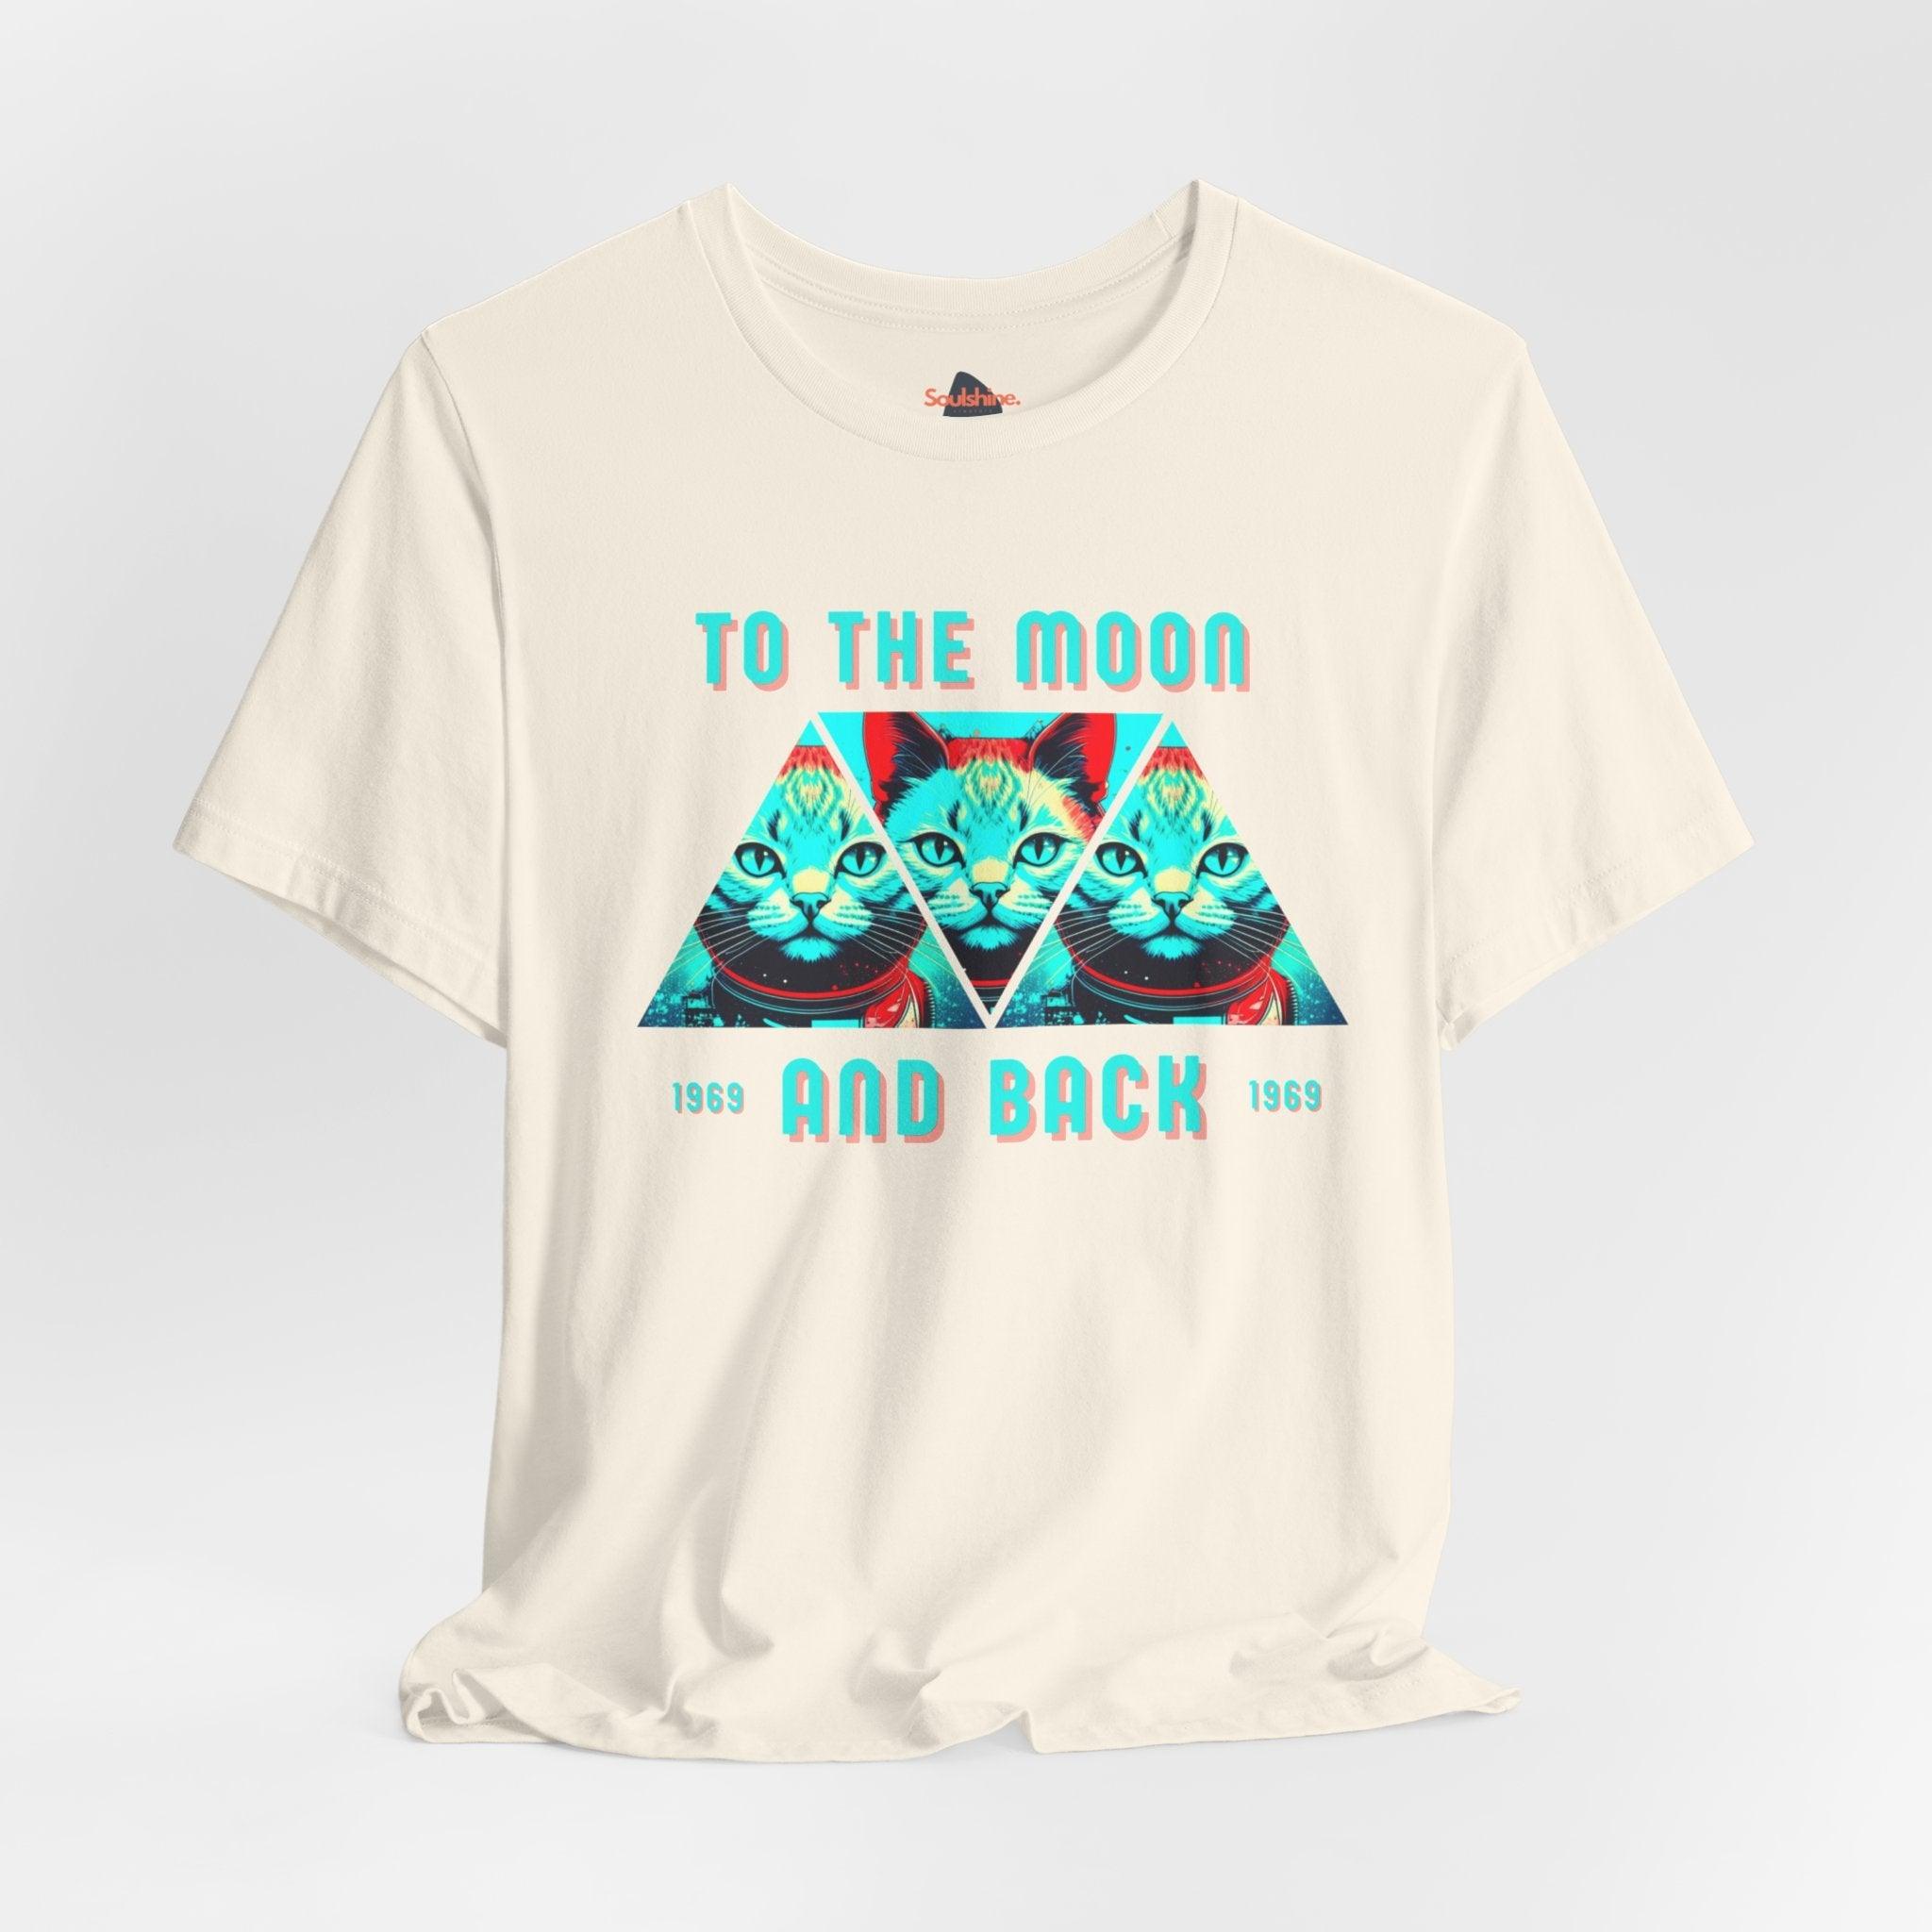 To the moon and back - Soulshinecreators - Unisex Jersey Short Sleeve Tee - US Natural S T-Shirt by Soulshinecreators | Soulshinecreators